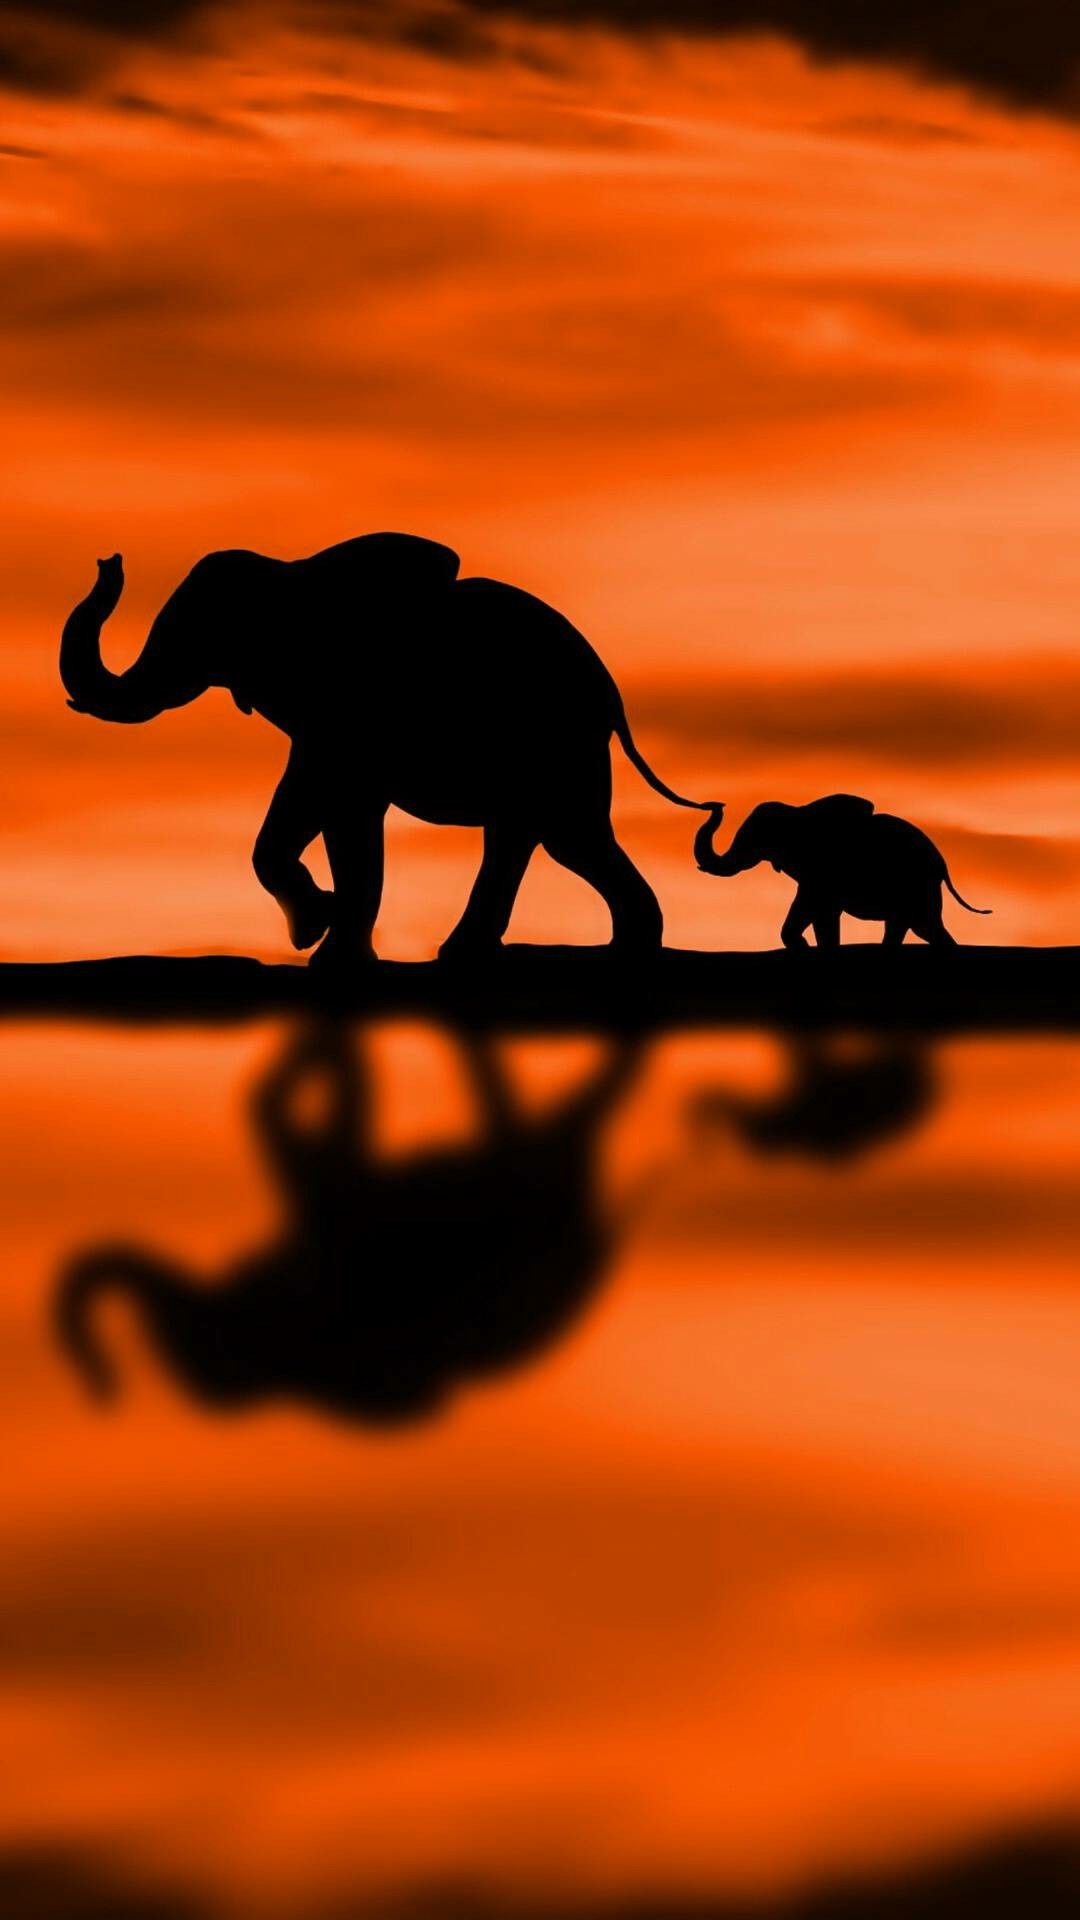 A baby elephant following it's mother on a beautiful orange background. Silhouette art, Silhouette painting, Elephant photography